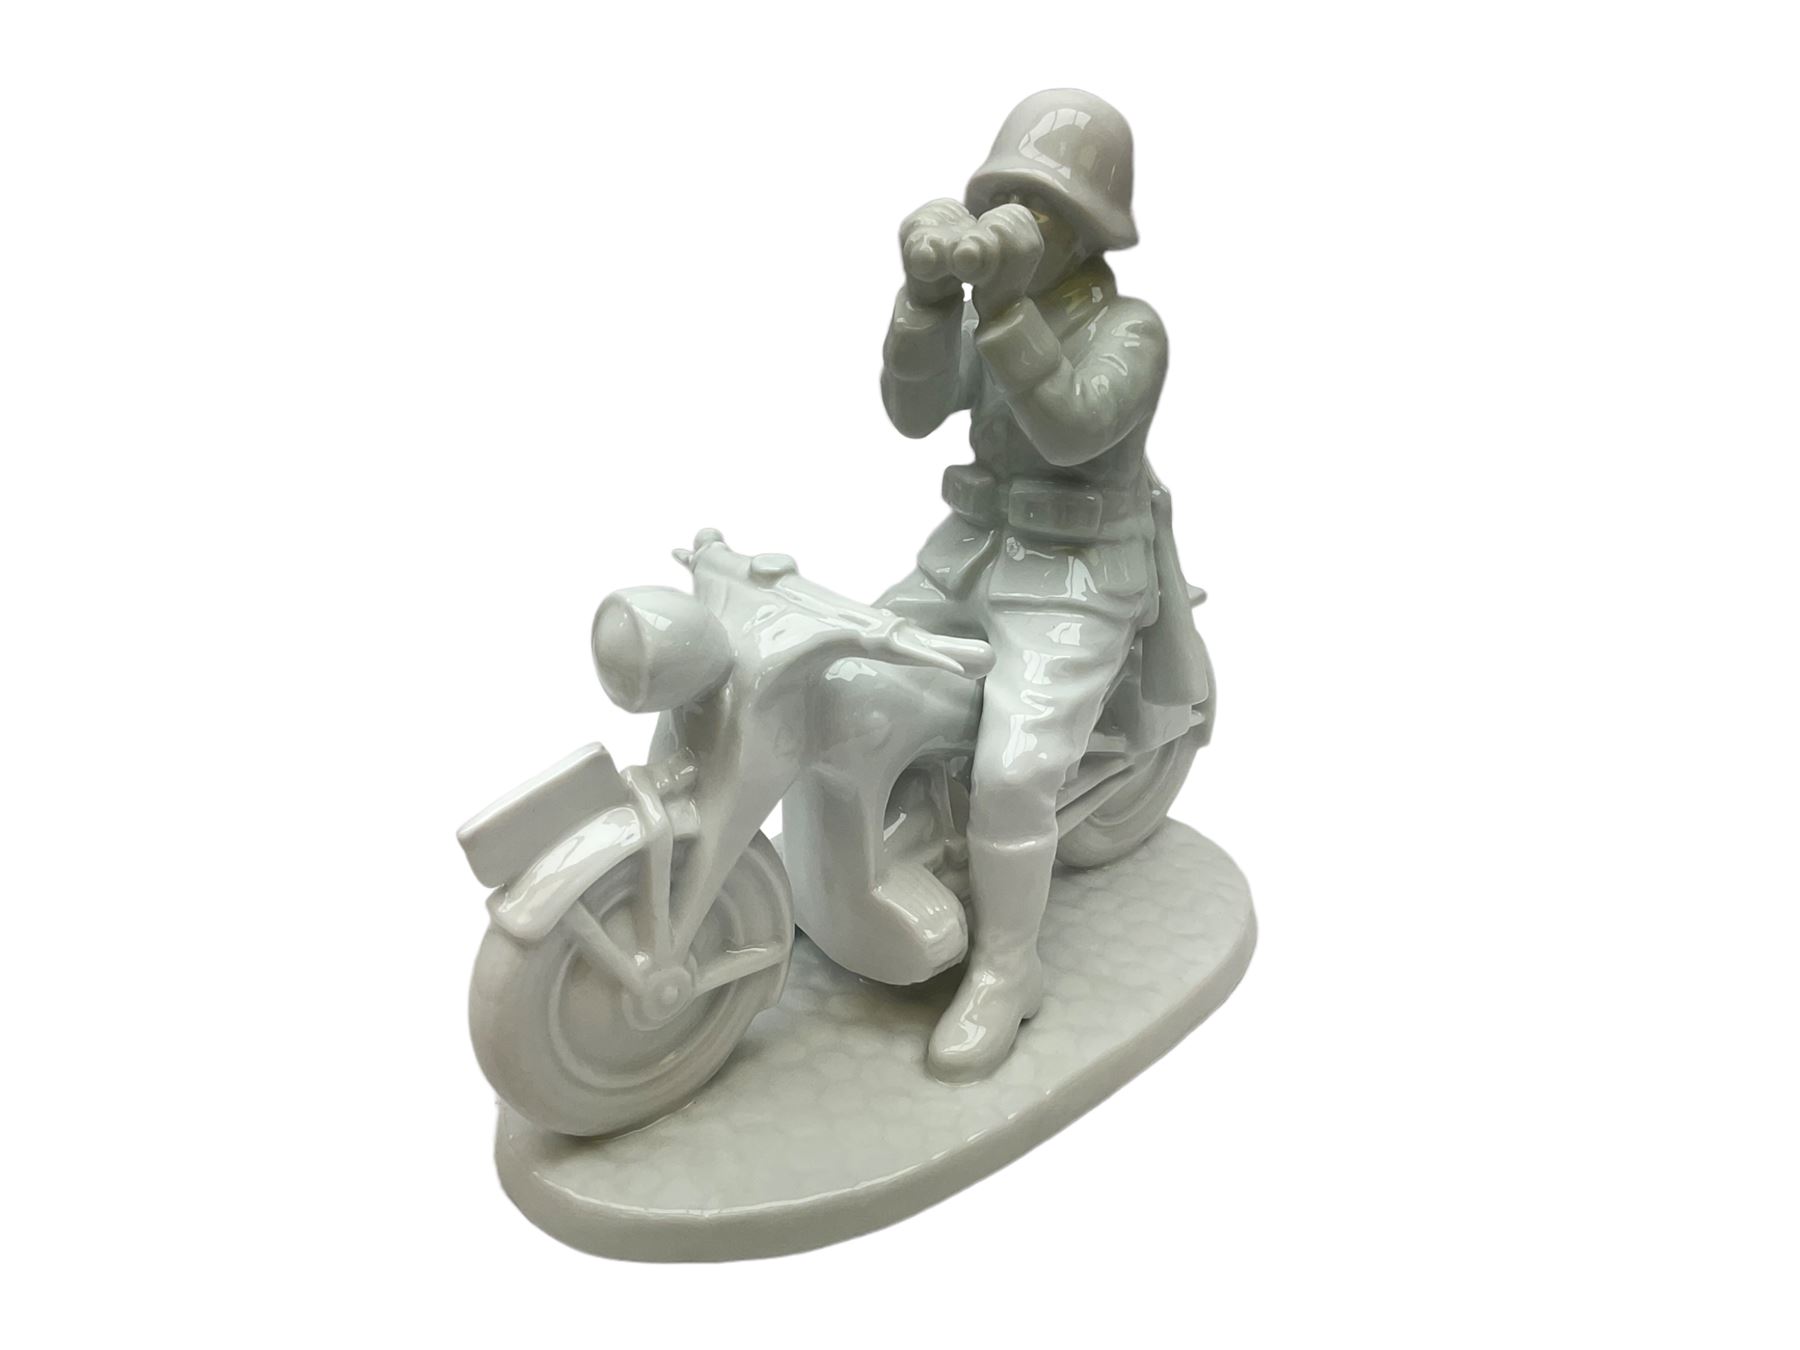 Neundorf figure modelled as a soldier seated upon a stationary motorcycle looking through binoculars - Image 7 of 8